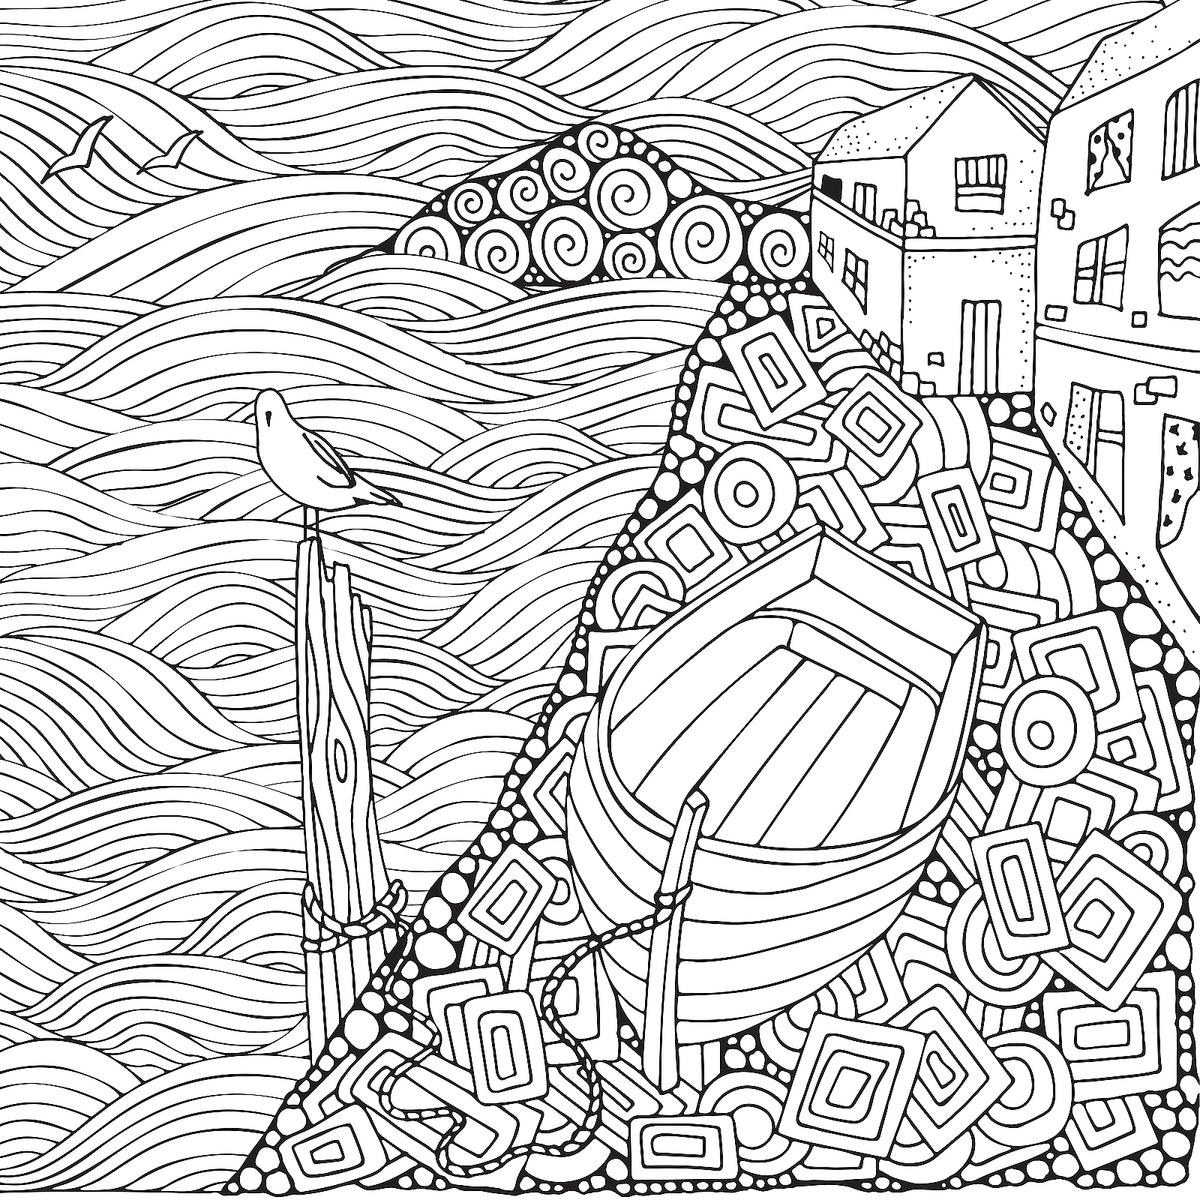 Travel coloring pages free printable coloring pages of scenic places youd want to escape to printables mom